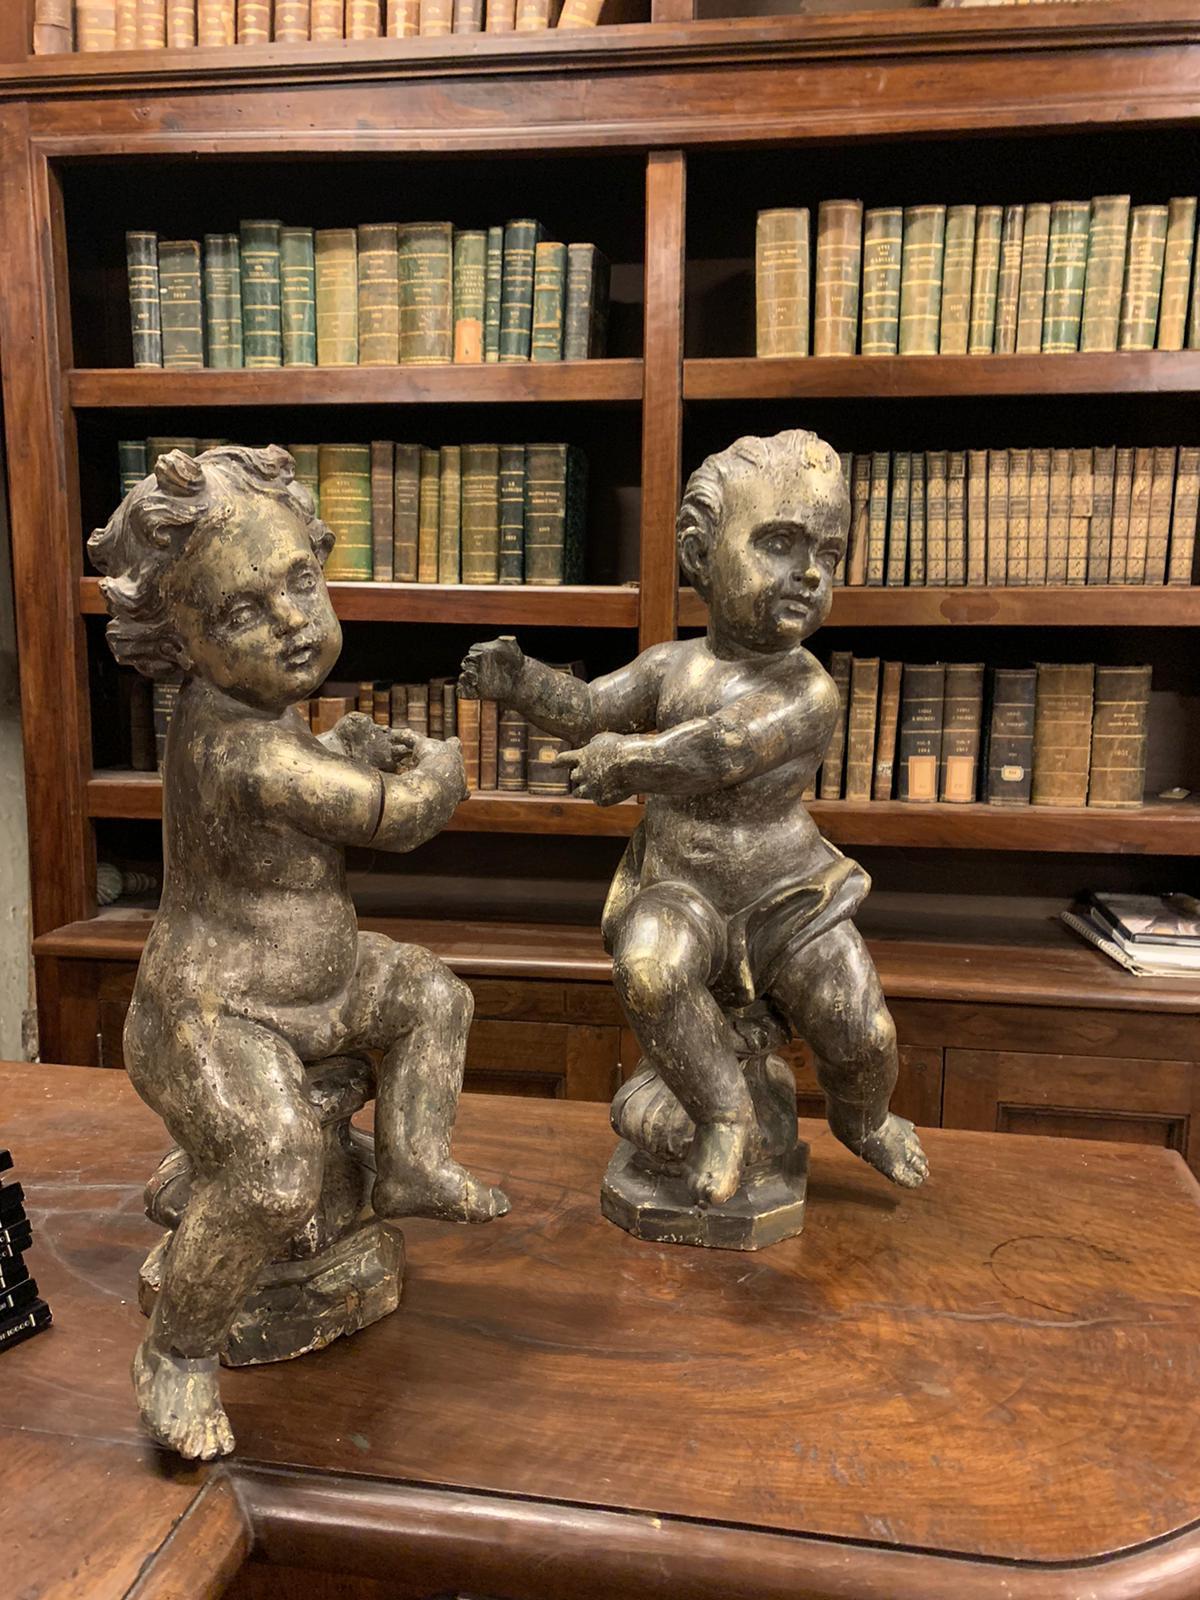 Italian Antique Pair of Sculptures, Cherubs Silvered and Gilded Wood, 18th Century Italy